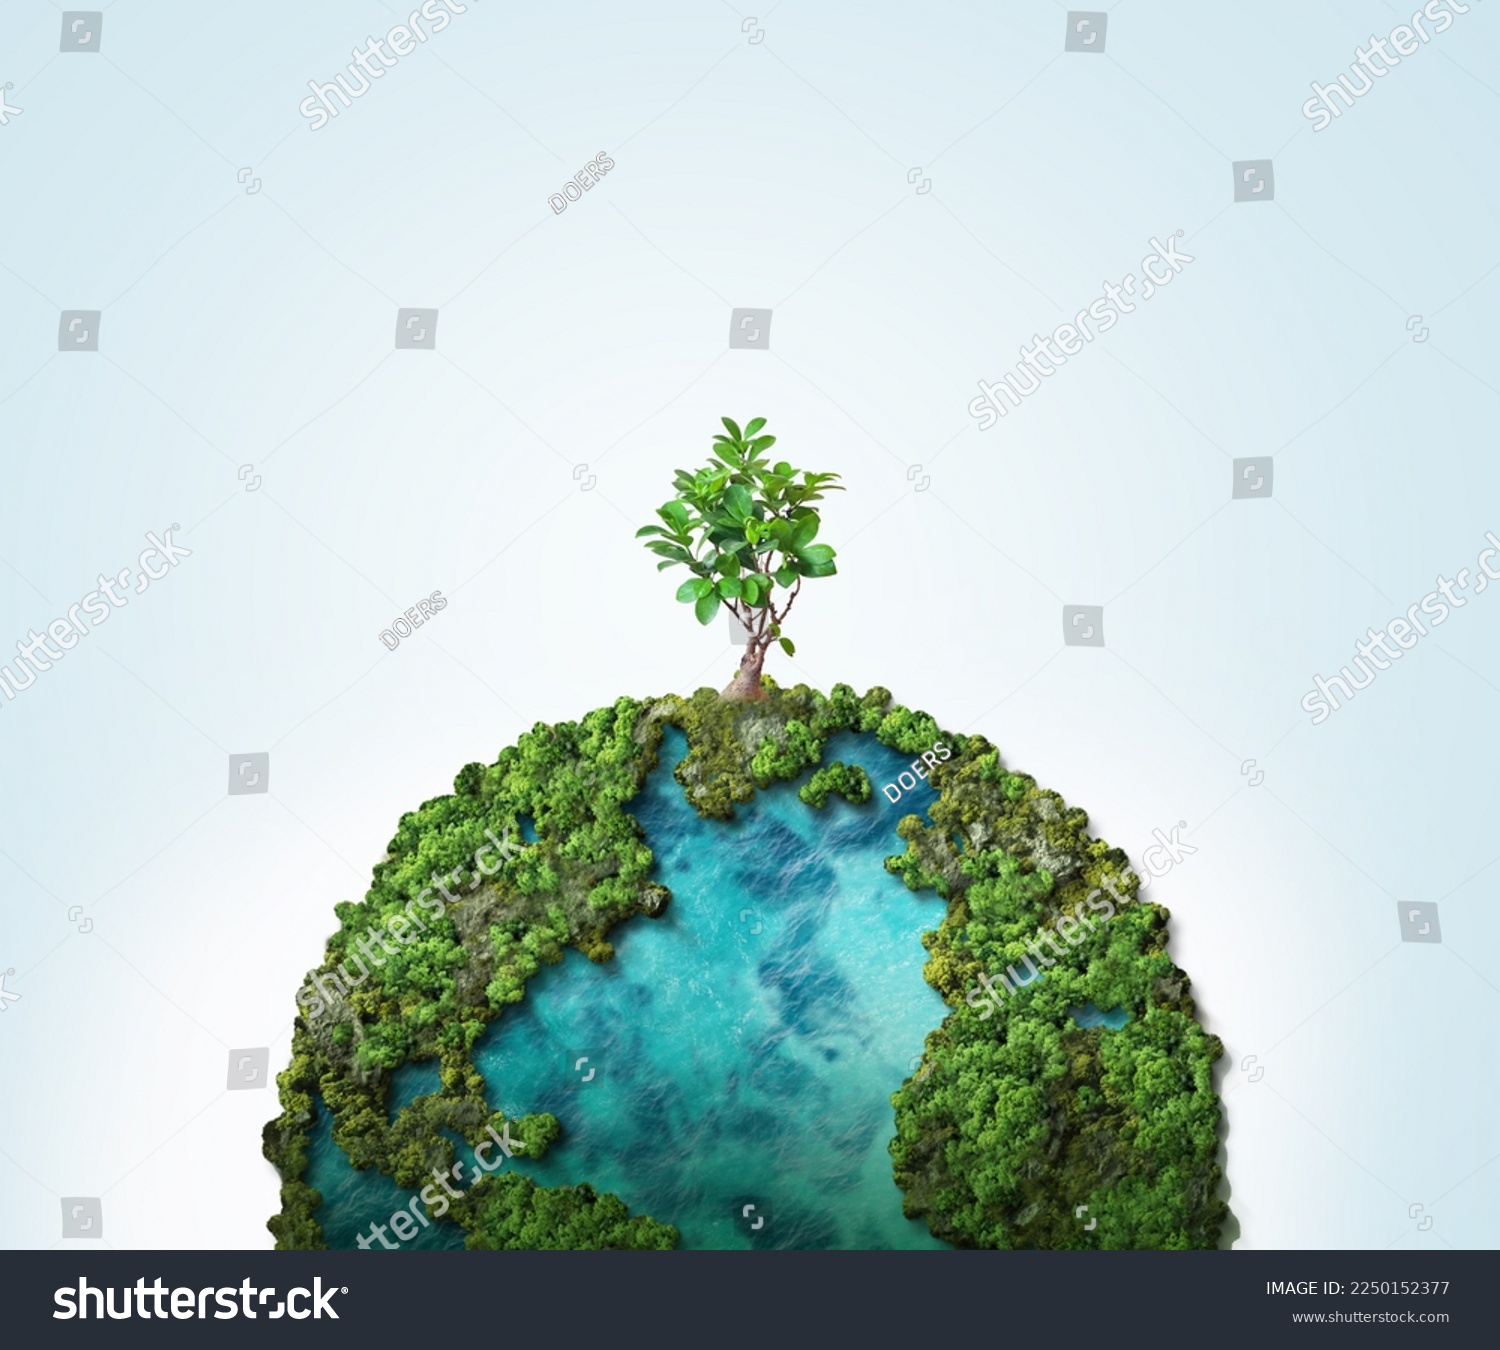 Invest in our planet. Earth day 2023 concept background. Ecology concept. Design with globe map drawing and leaves isolated on white background.  #2250152377